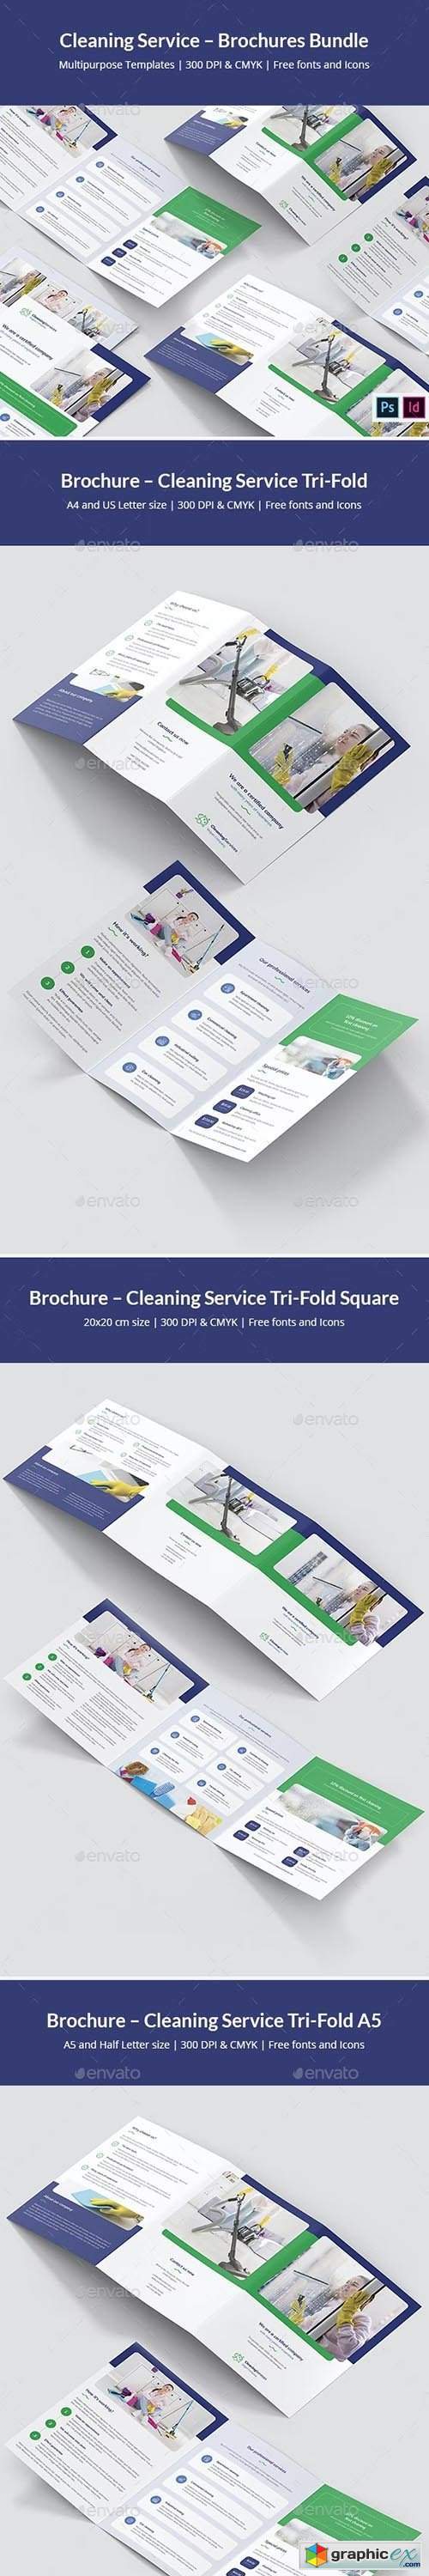 Cleaning Service – Brochures Bundle Print Templates 8 in 1 25675641